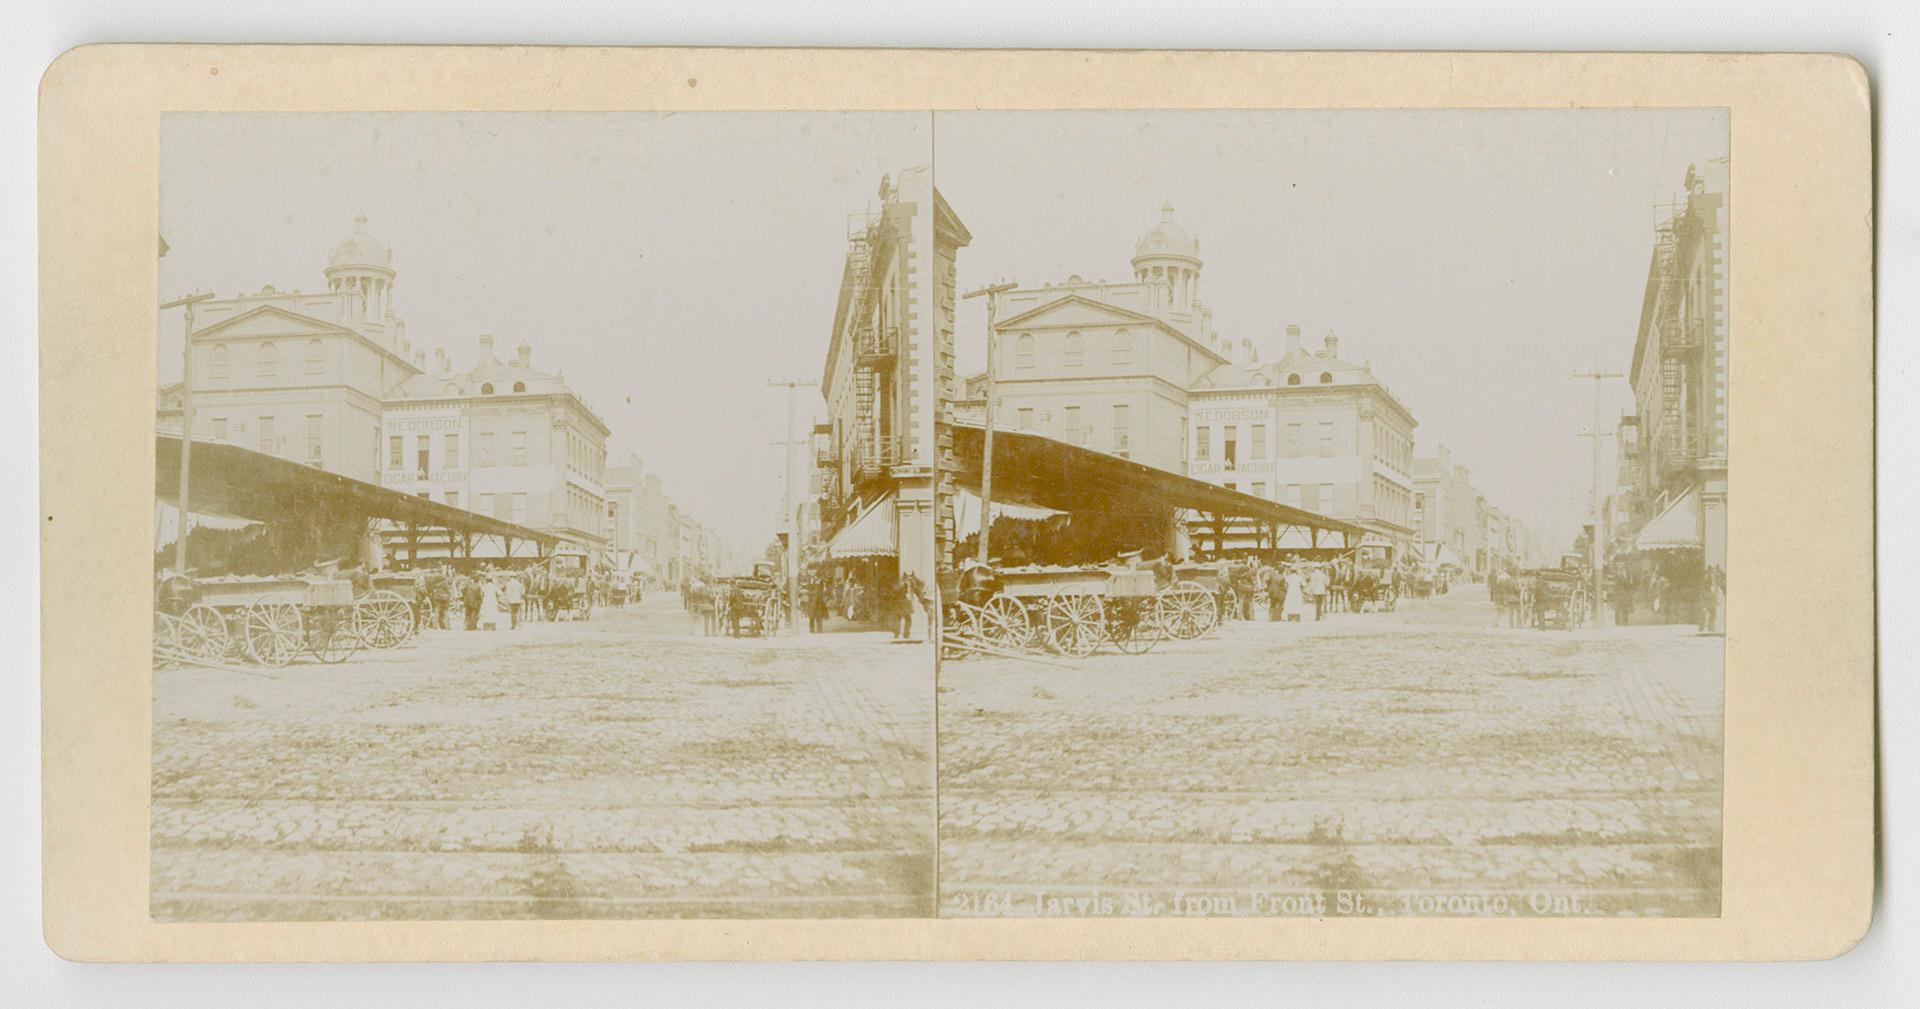 Pictures show covered market stalls with large city buildings behind them.